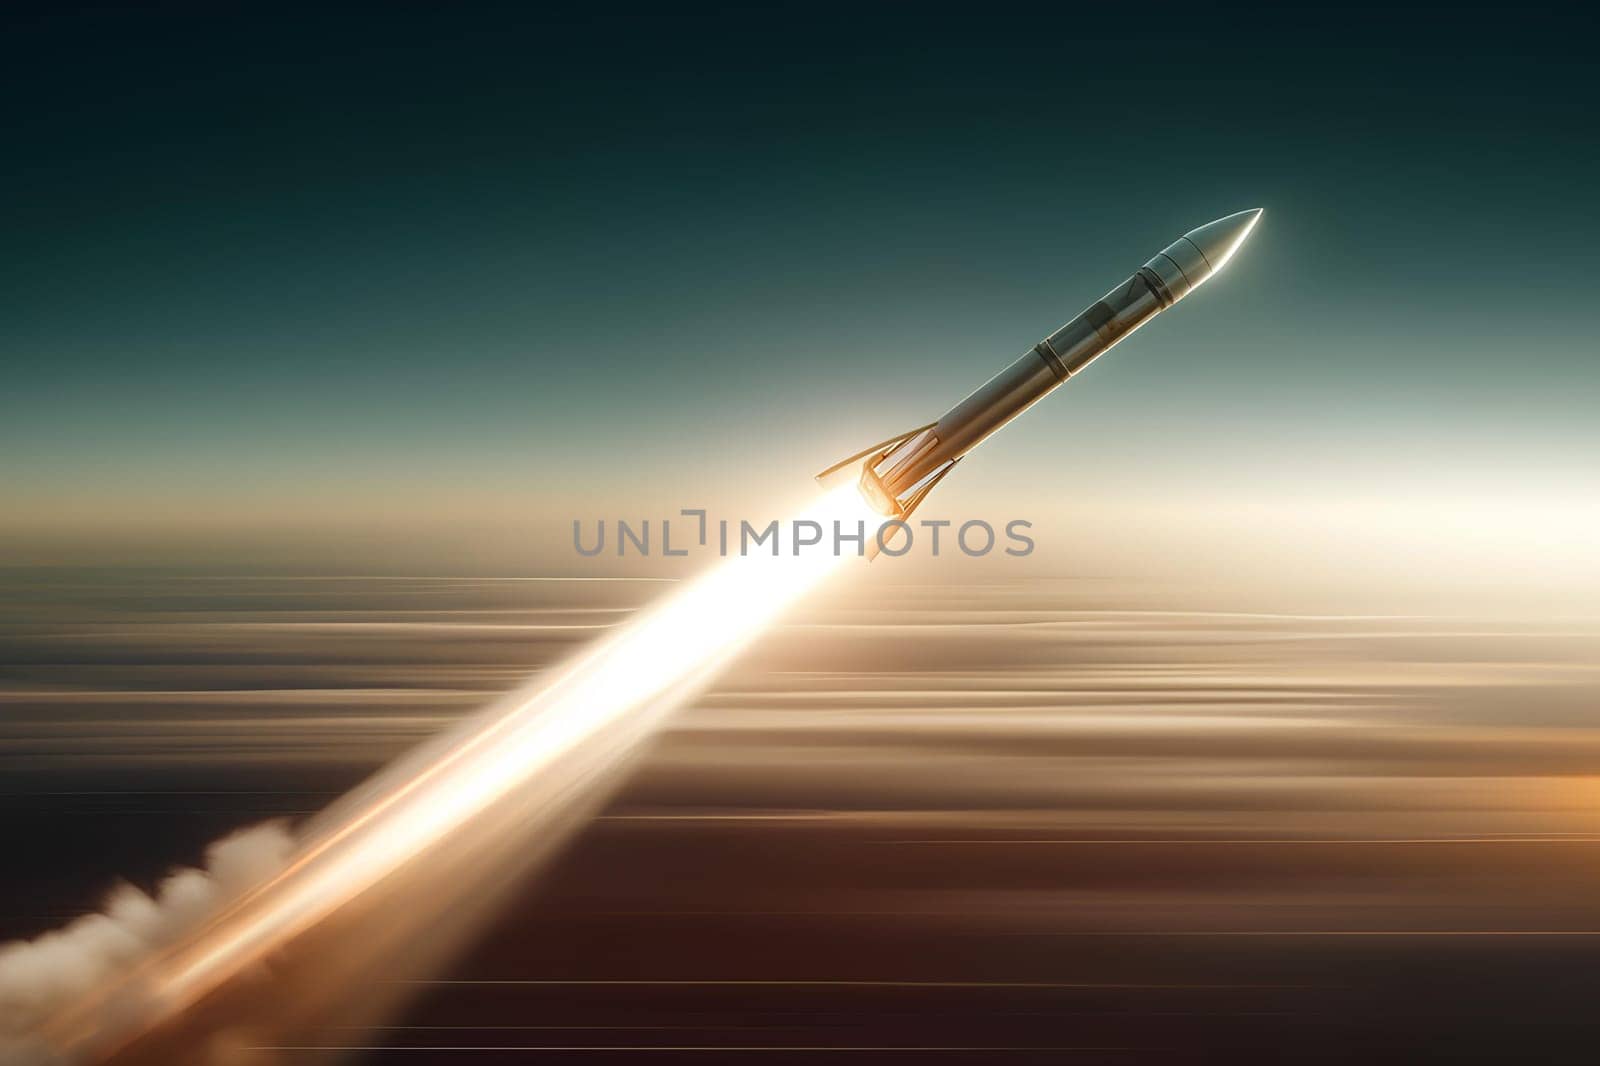 a flying rocket with a bright trail and a plume of exhaust gases showing its path by Annado